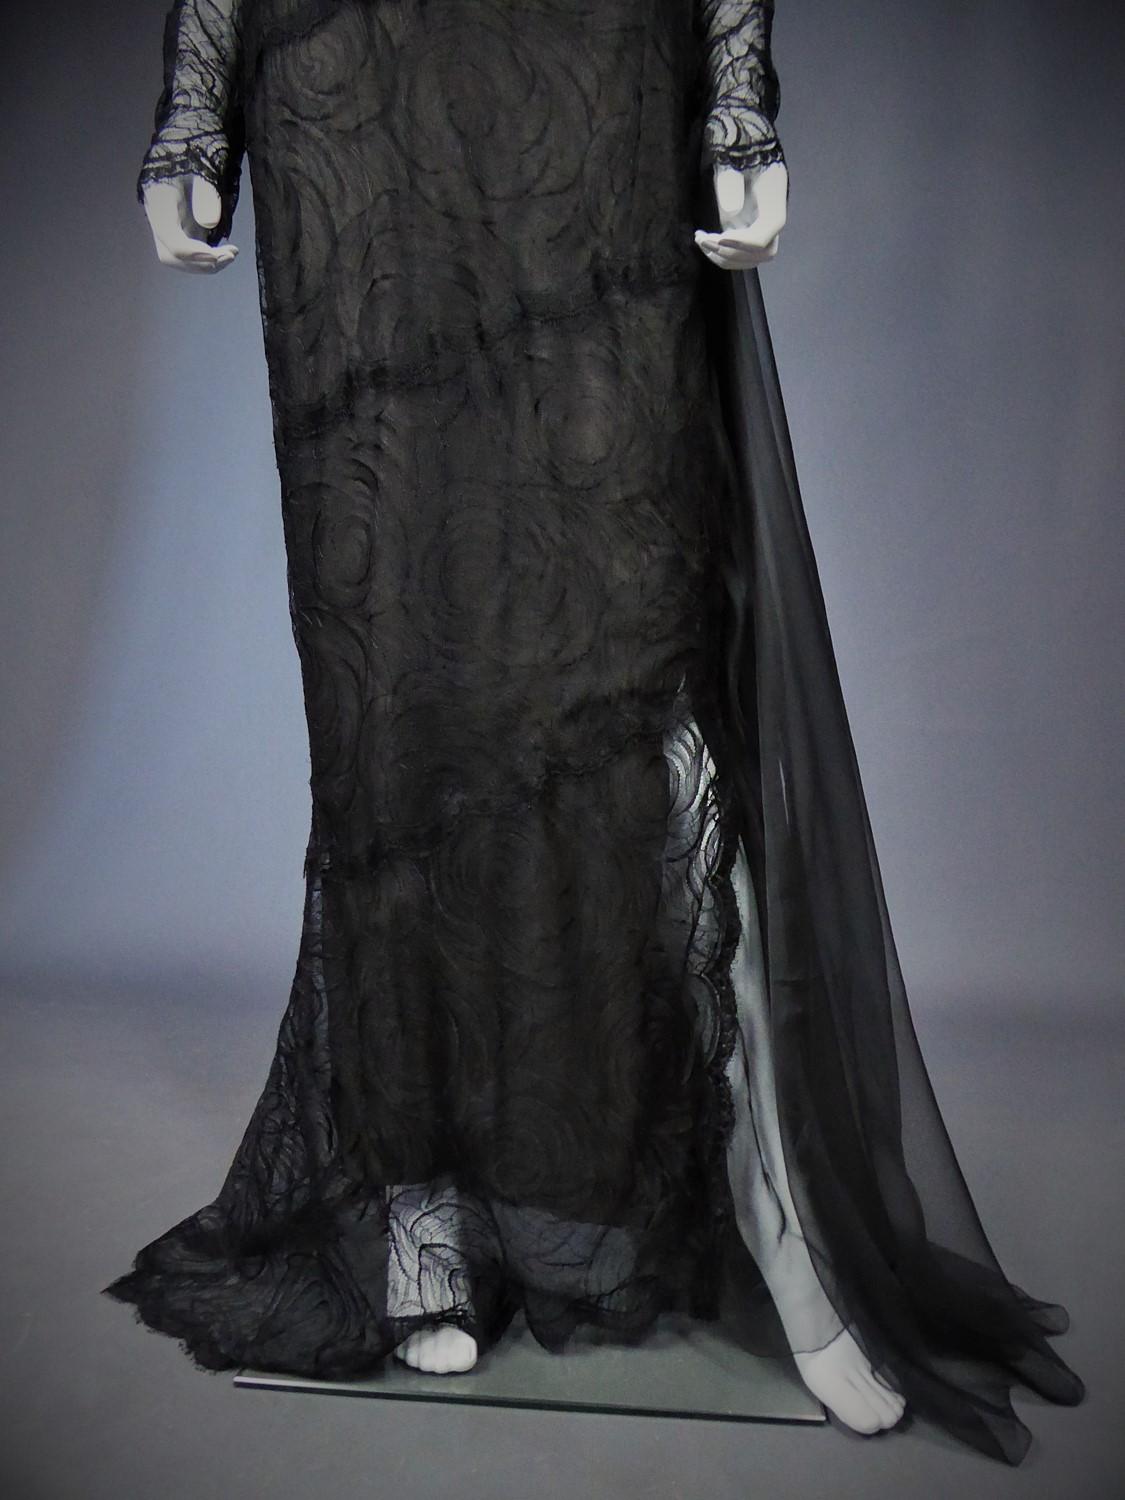 Black A Chanel Haute Couture Evening Dress by Karl Lagerfeld in Calais Lace Circa 1997